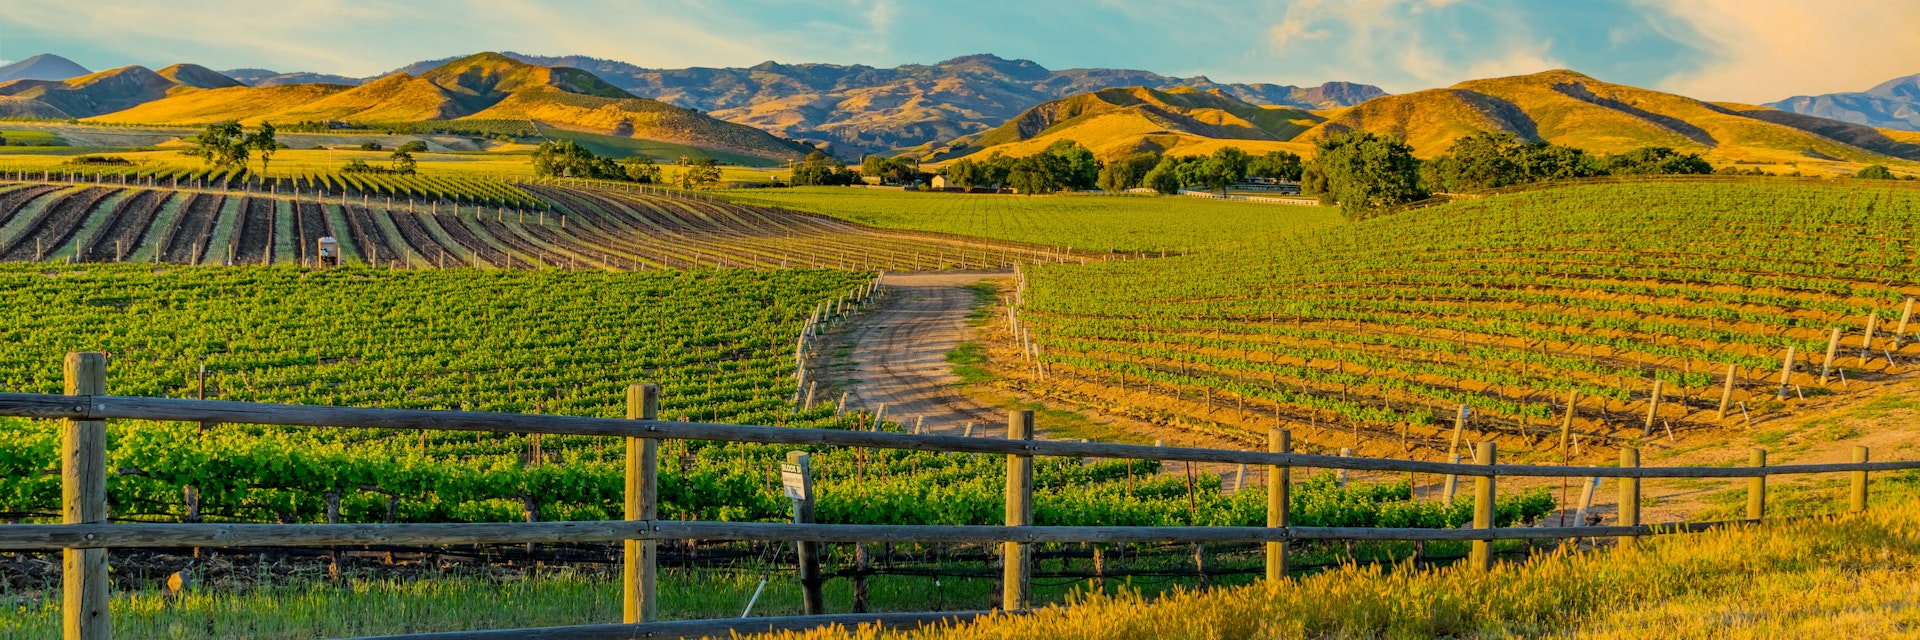 Spring crop; wine country; rolling hills; rows of crops; lush vegetation; Travel destination; rolling vineyard; agricultural field